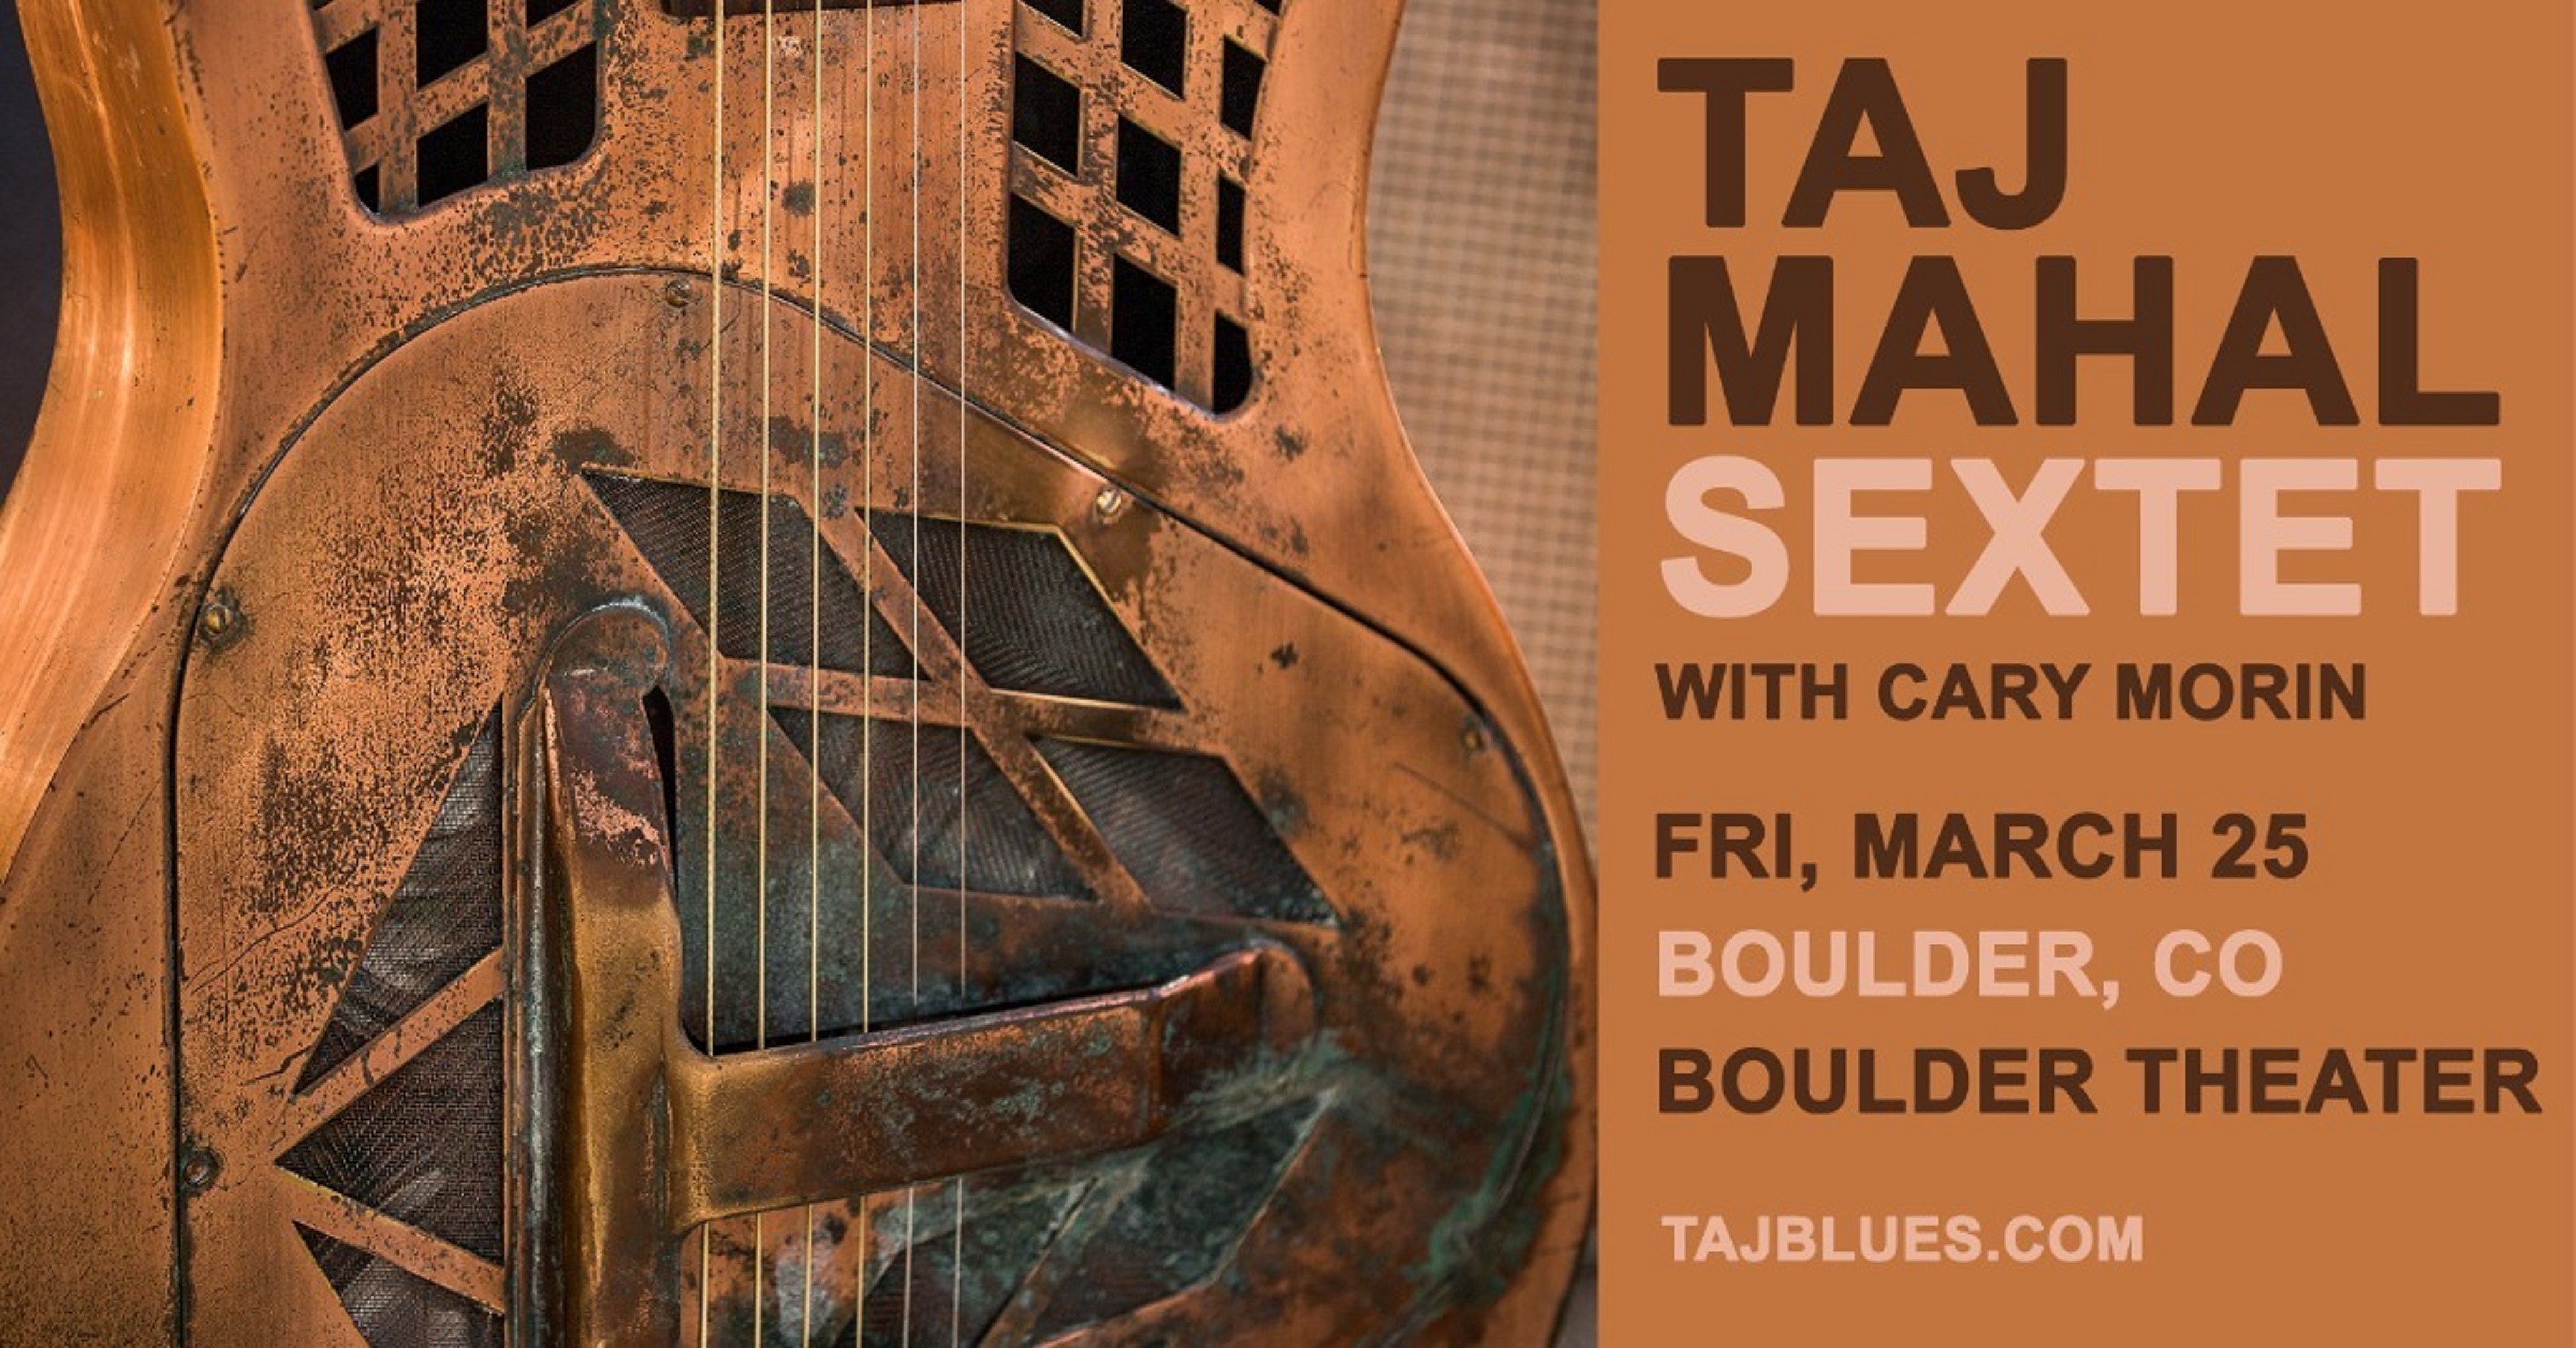 Taj Mahal Sextet to play Boulder Theater March 25th, 2022